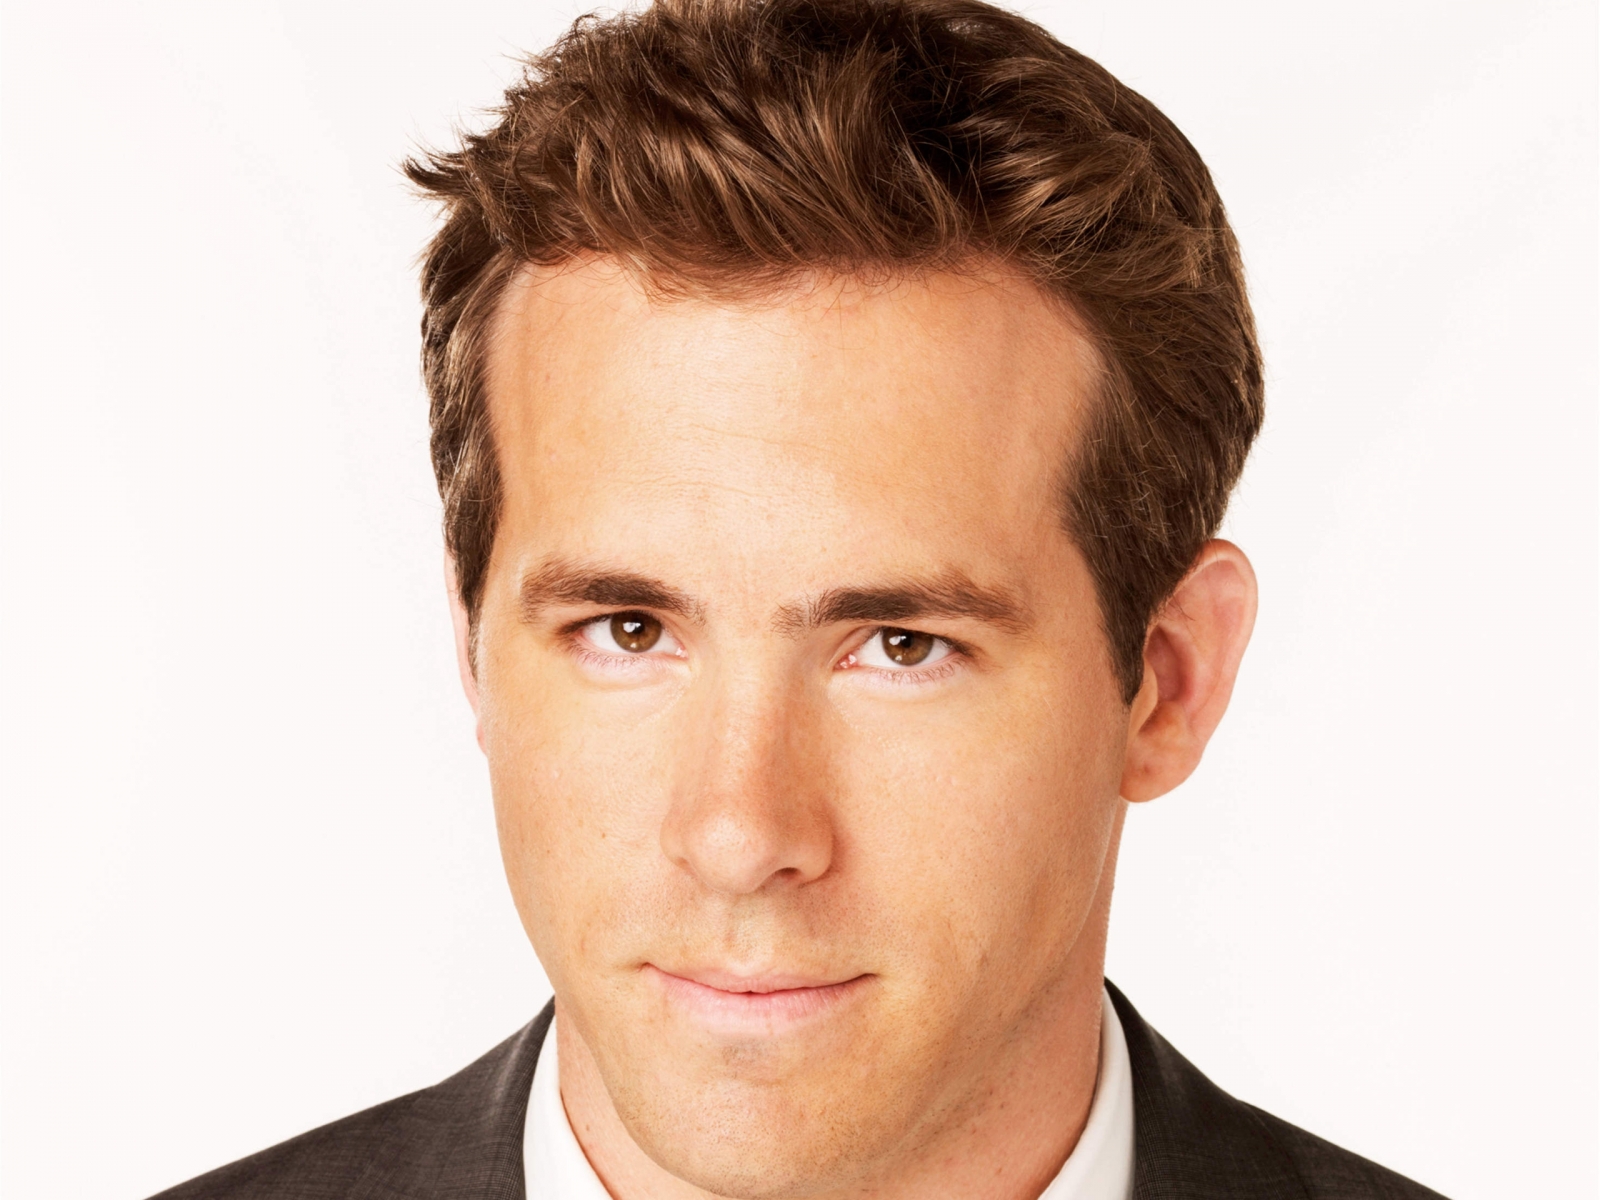 Ryan Reynolds Backgrounds, Compatible - PC, Mobile, Gadgets| 1600x1200 px